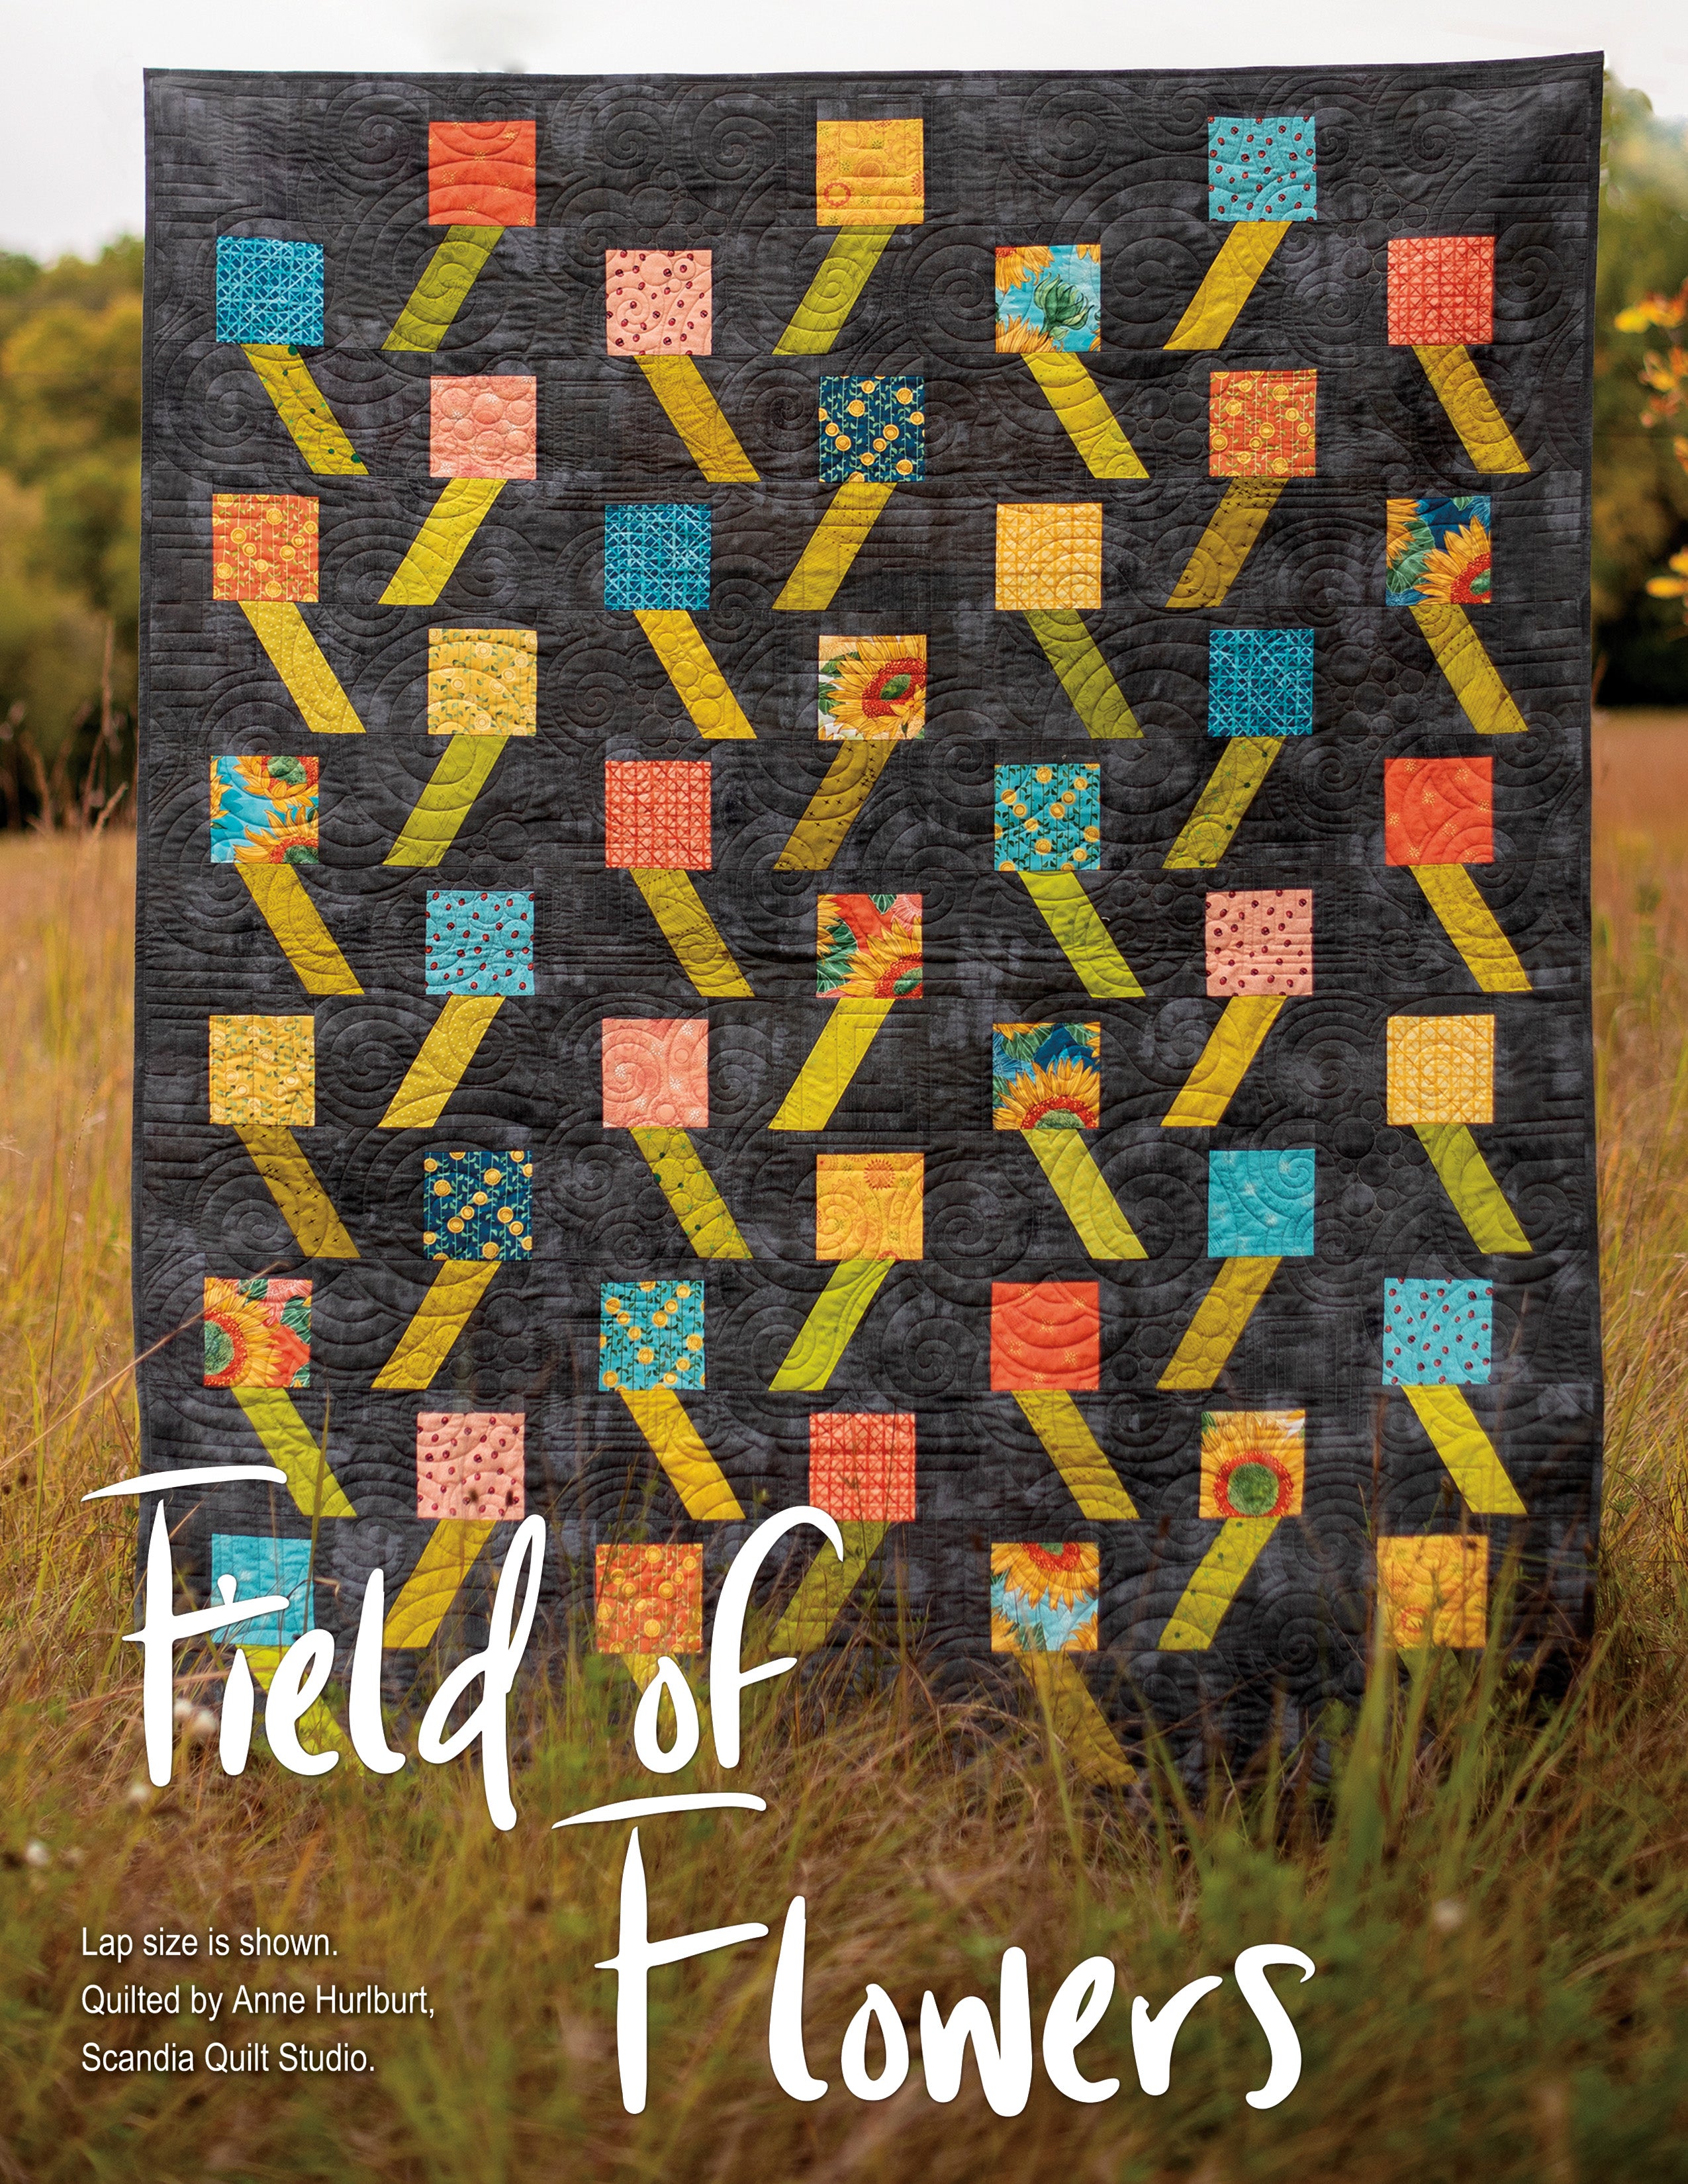 GE Designs Stripology Squared, Full Color Softcover Quilt Pattern Book